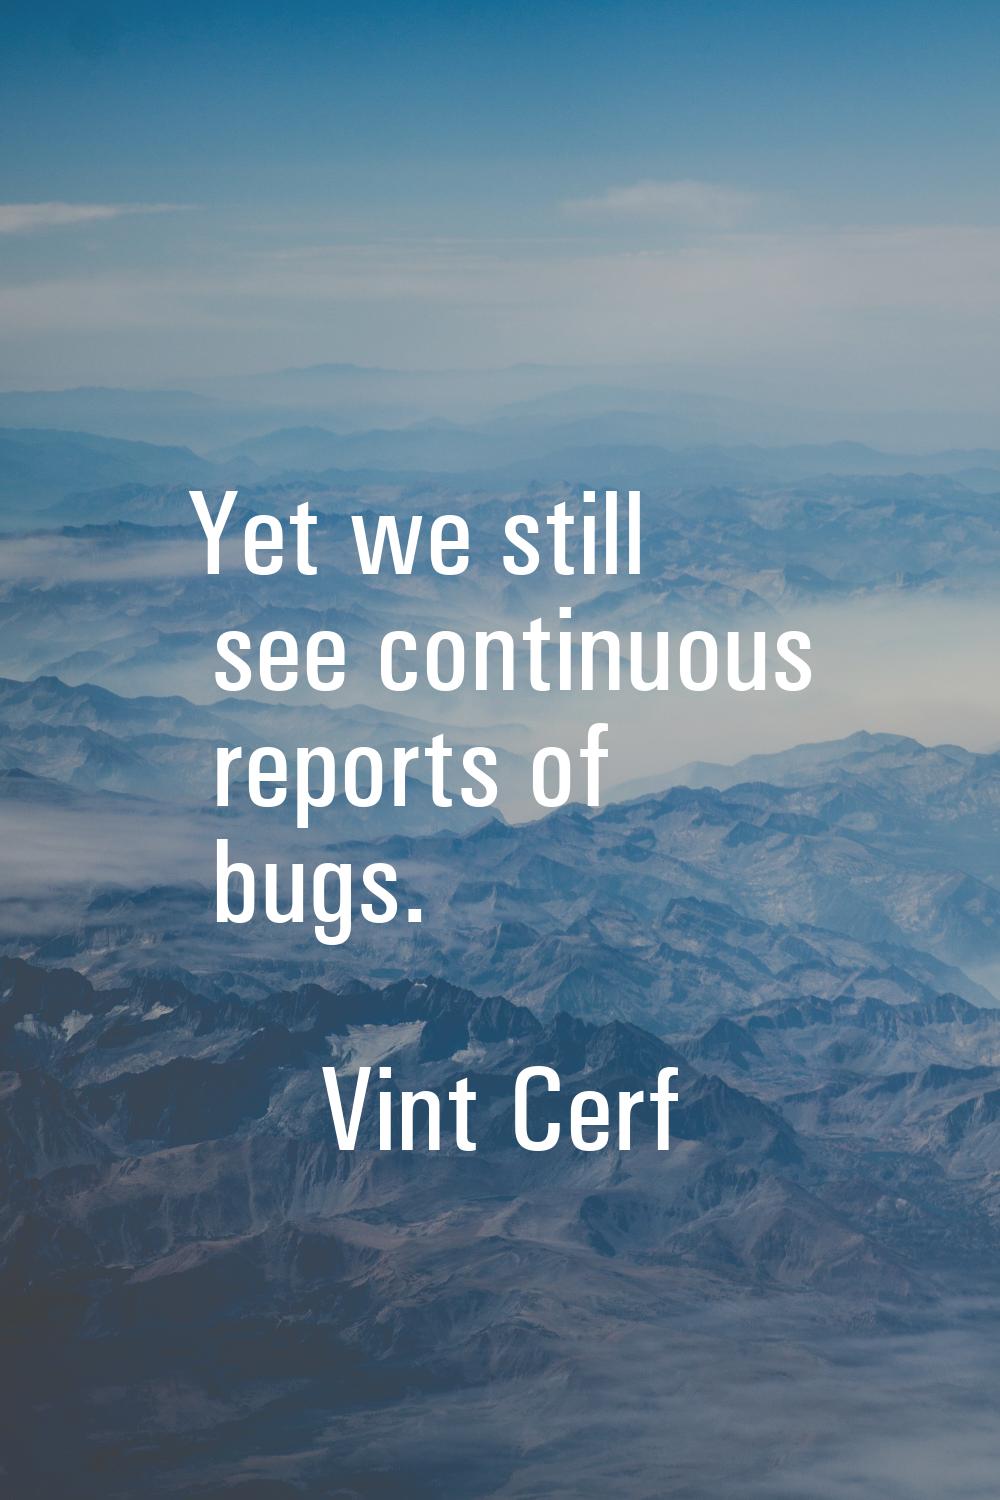 Yet we still see continuous reports of bugs.